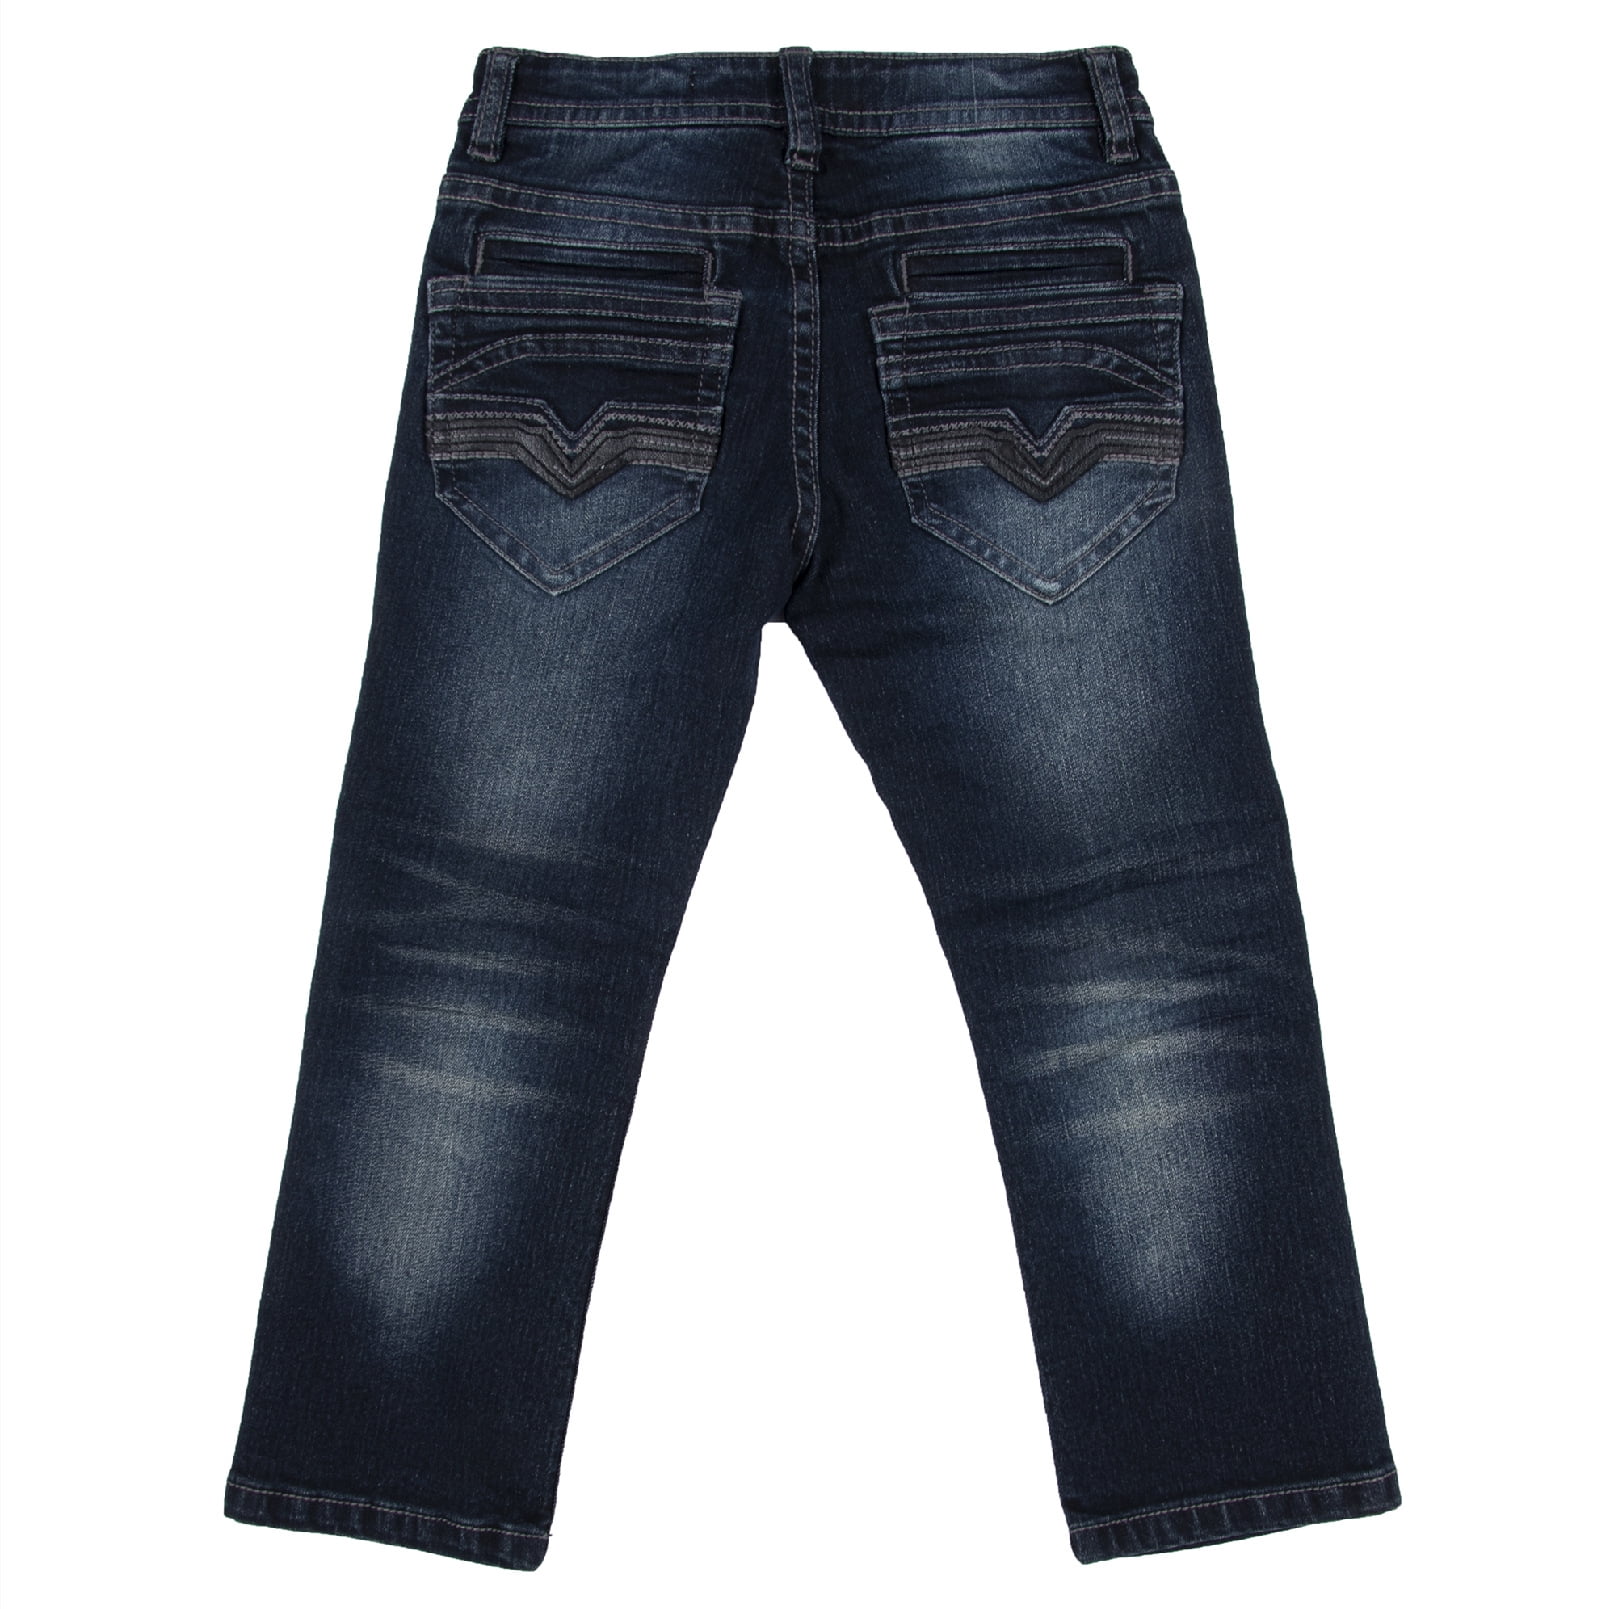 X RAY Skinny Jeans for Boys Slim Fit Denim Pants, Dark Blue - Ripped &  Stitched, Size 16